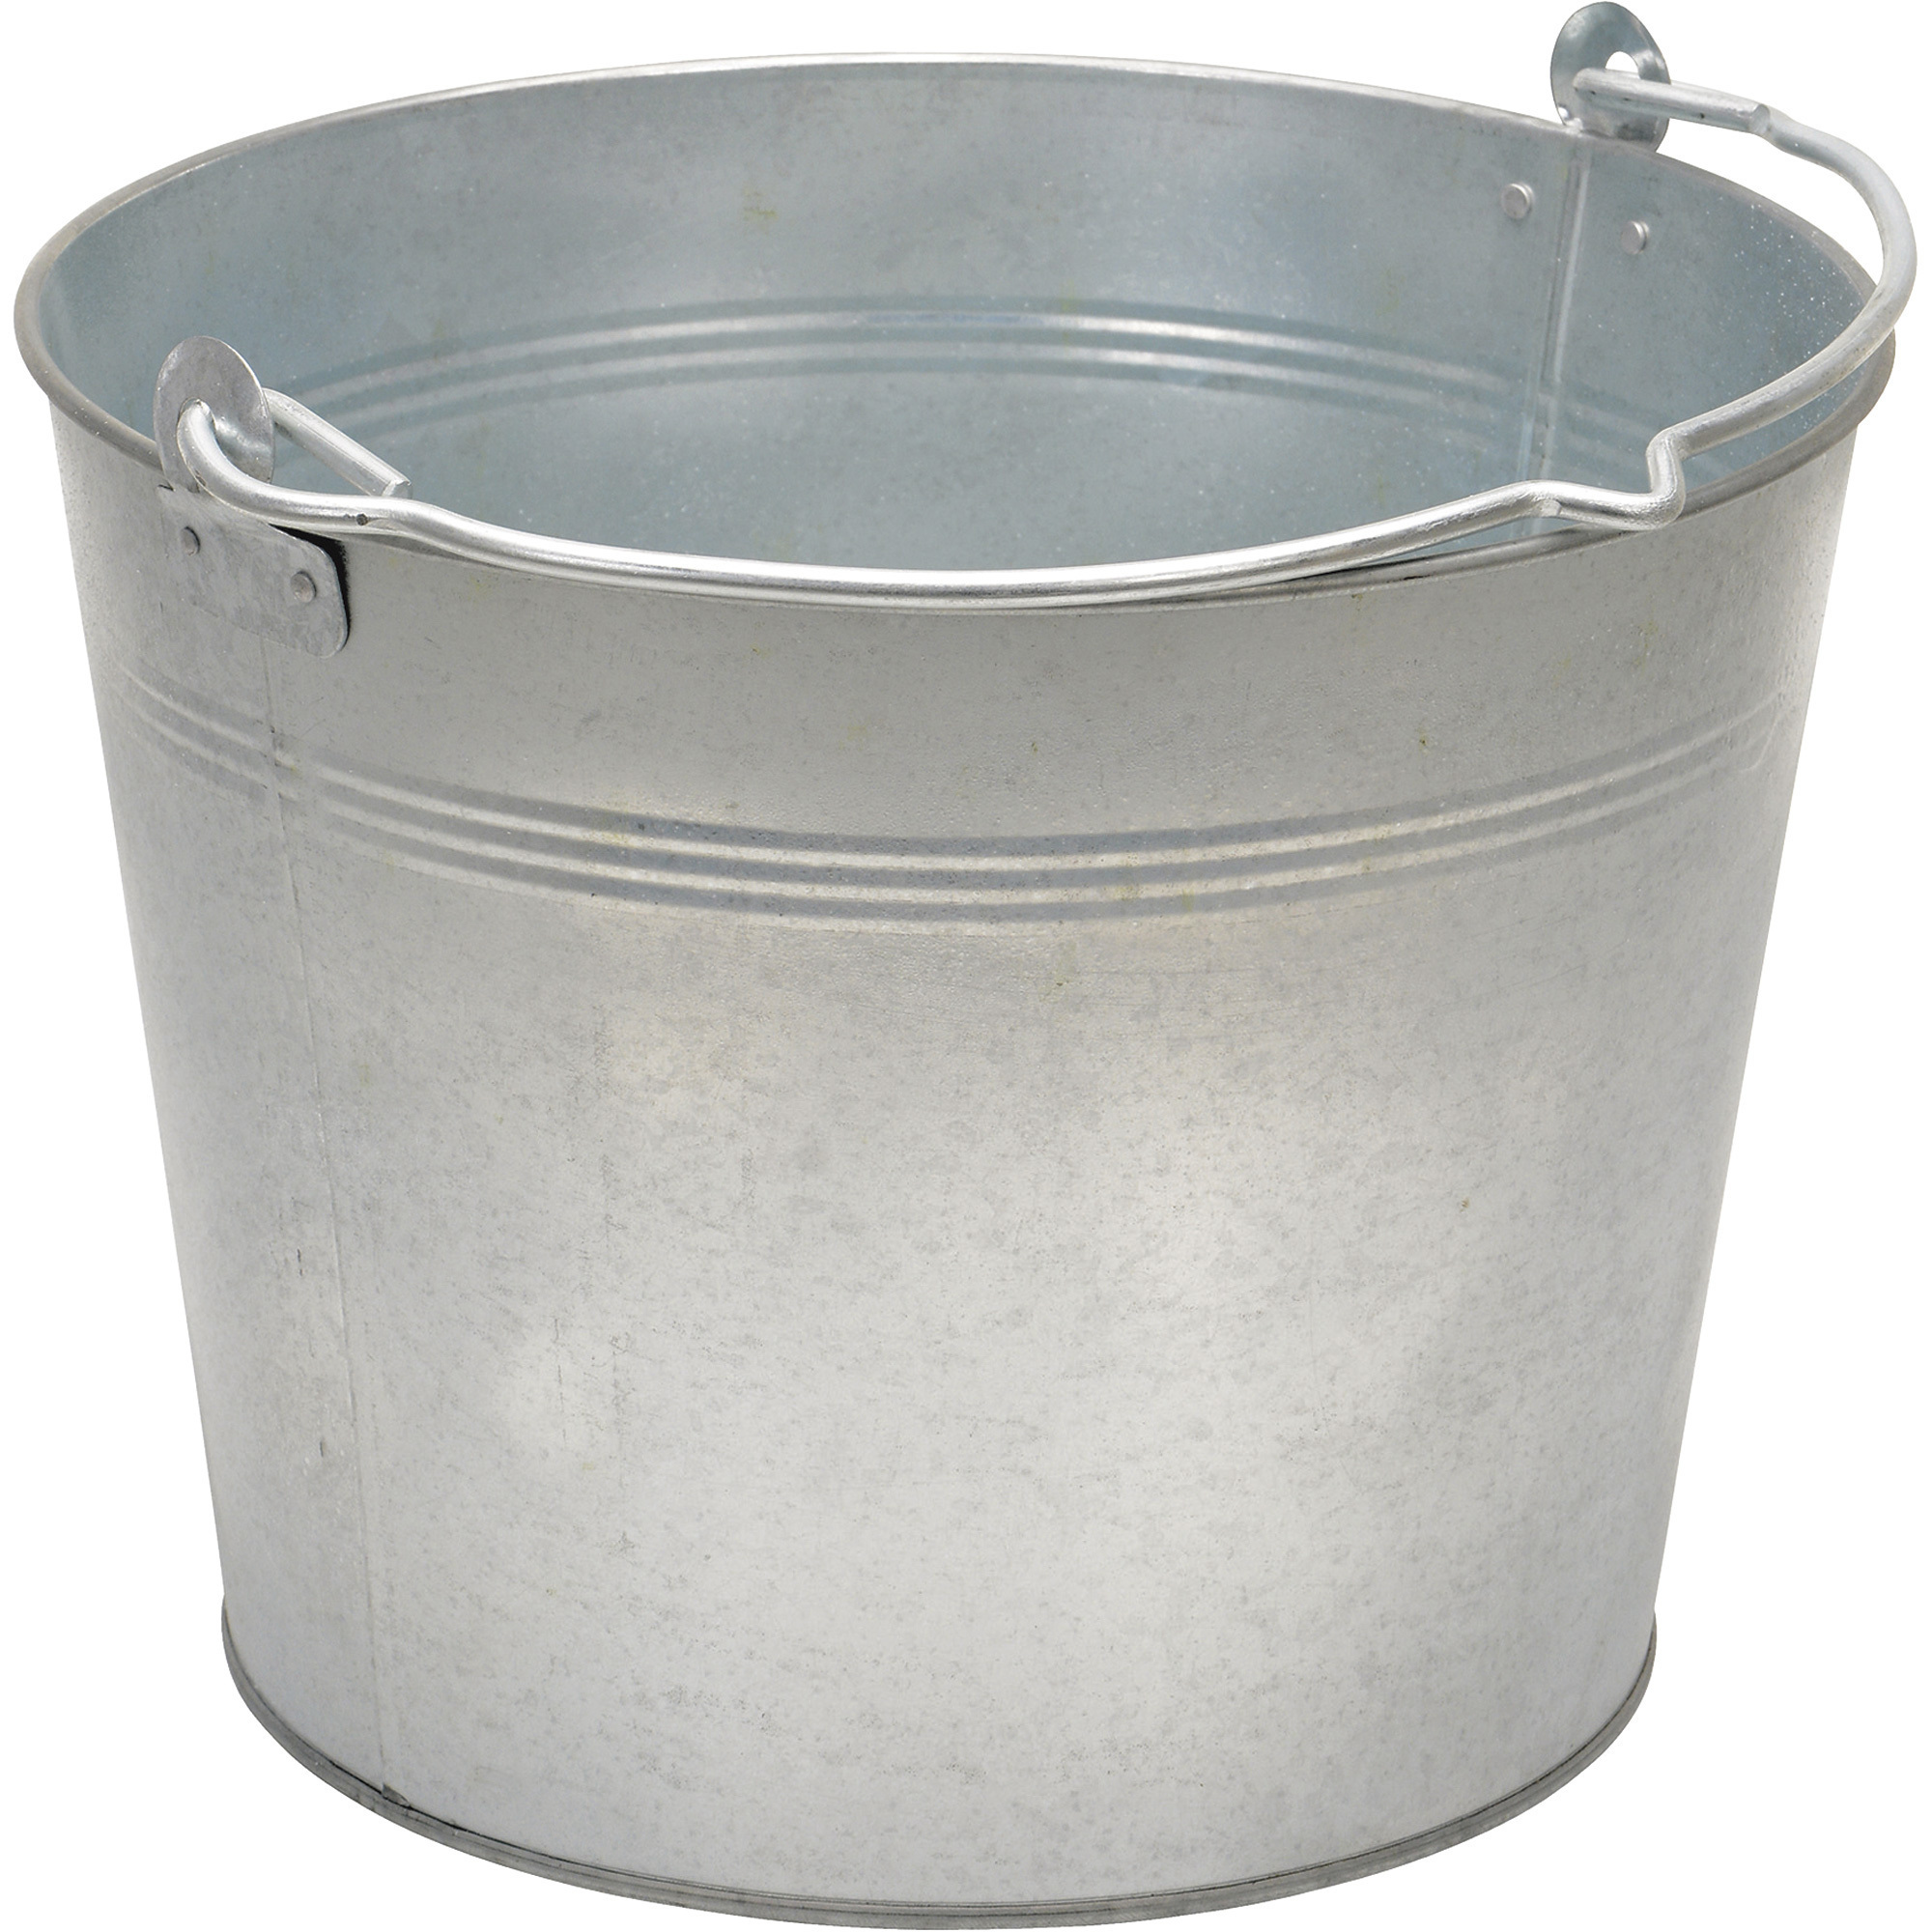 10 Pack Small Metal Buckets for Party Favors, Tiny Galvanized Silver Pails  for Crafts, Succulents (3.3 x 2.5 x 3 in)